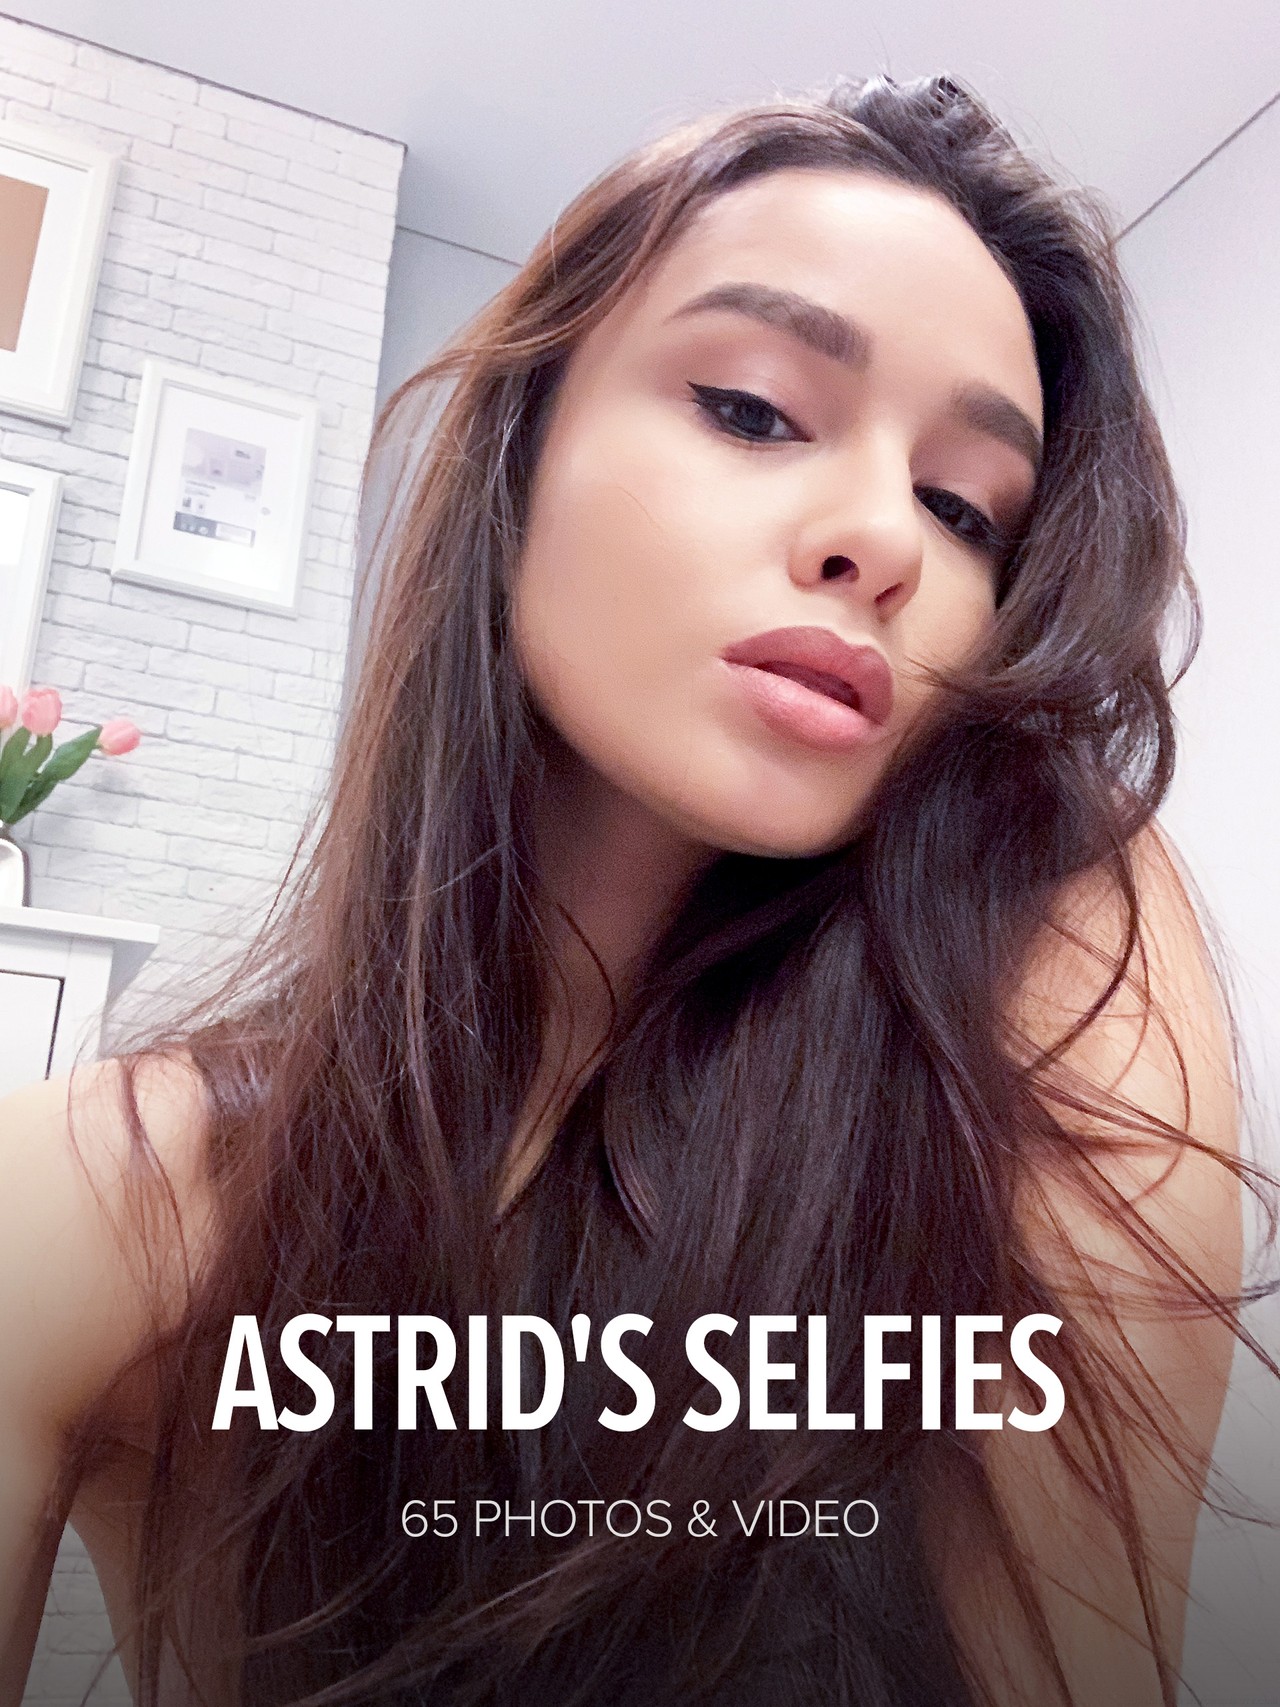 Astrid is a brand new talent that we have discovered in Ukraine and she